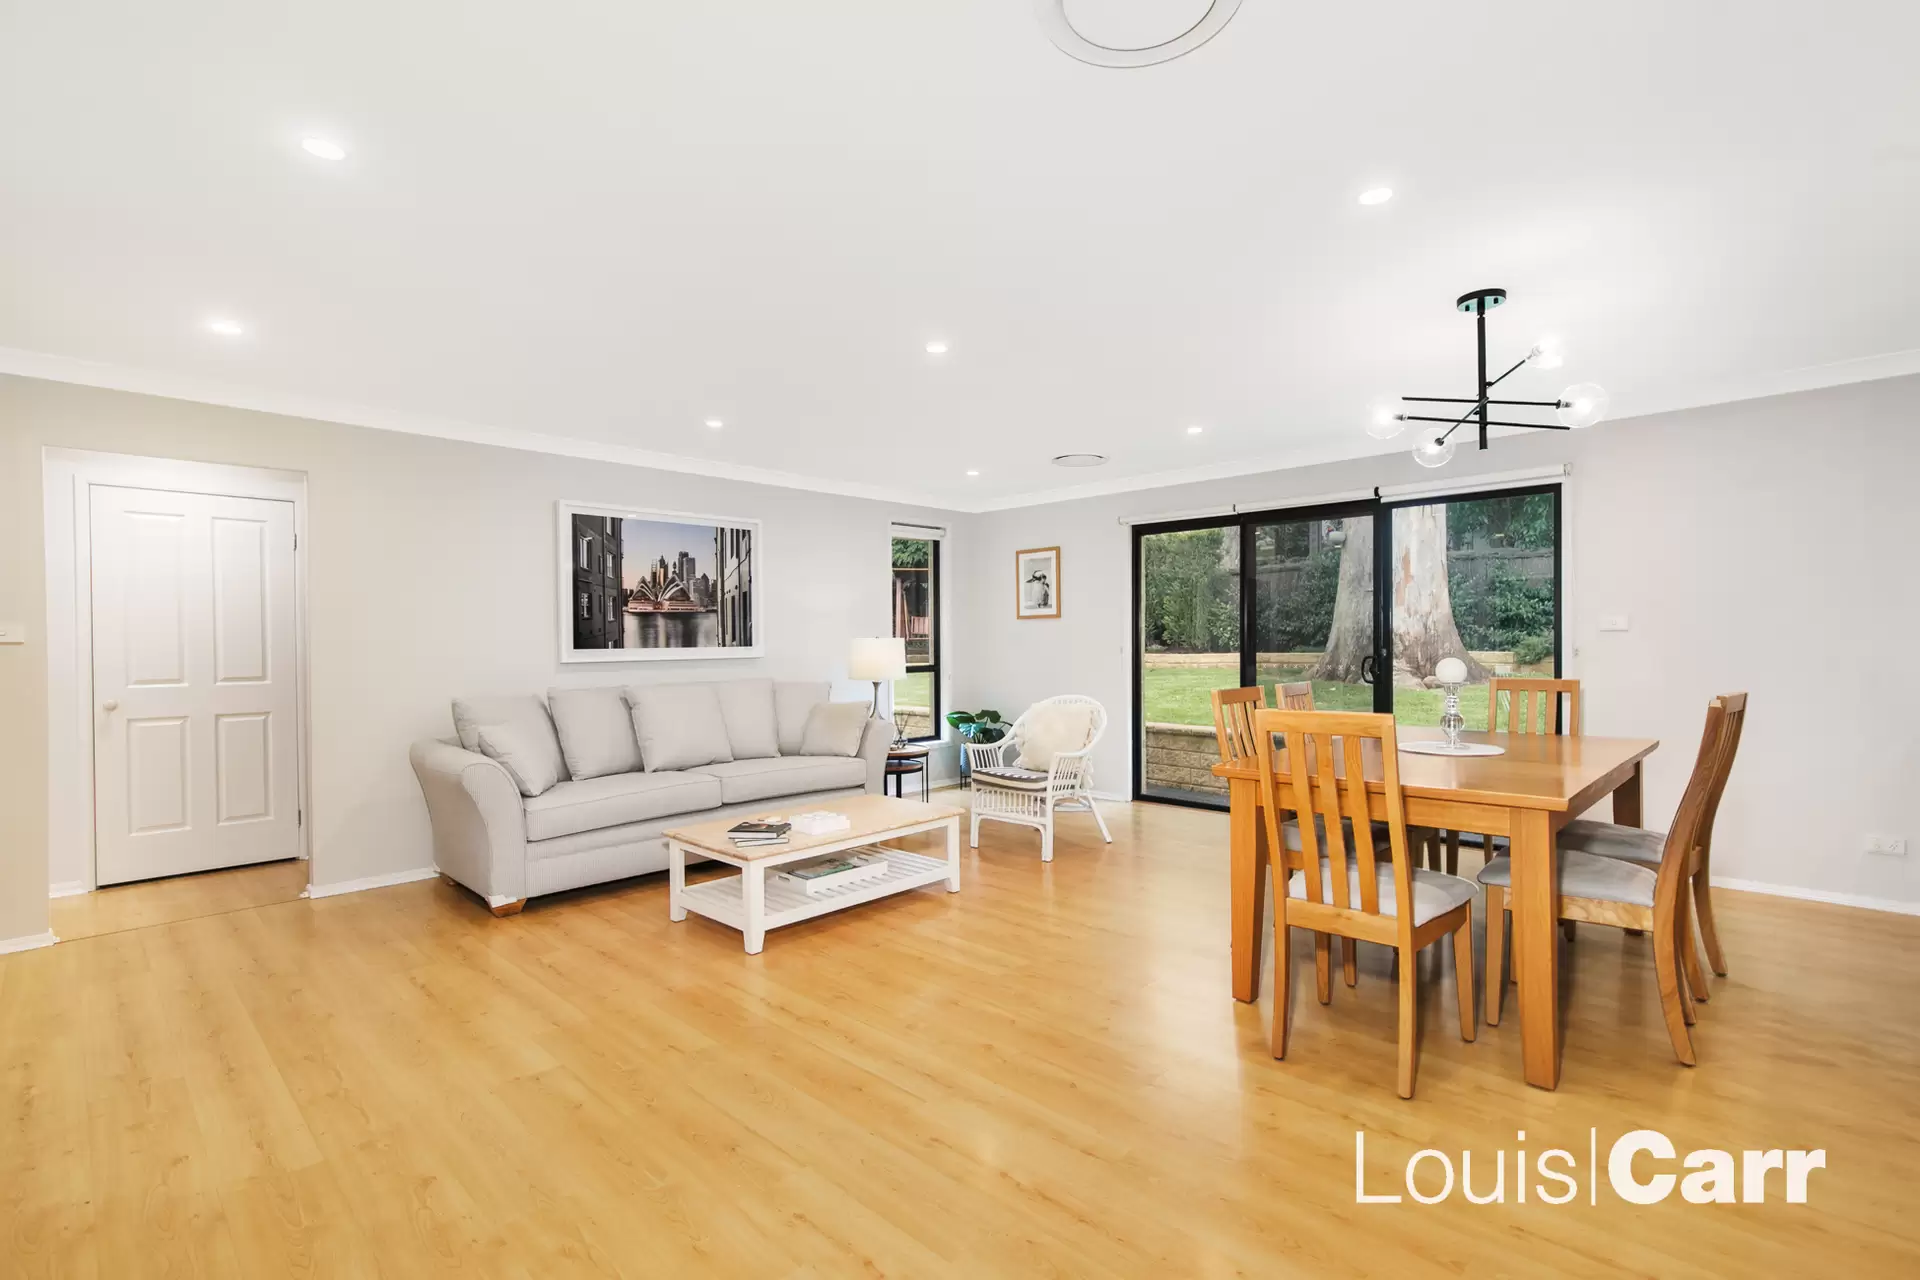 Photo #5: 14 Lee Road, West Pennant Hills - For Sale by Louis Carr Real Estate